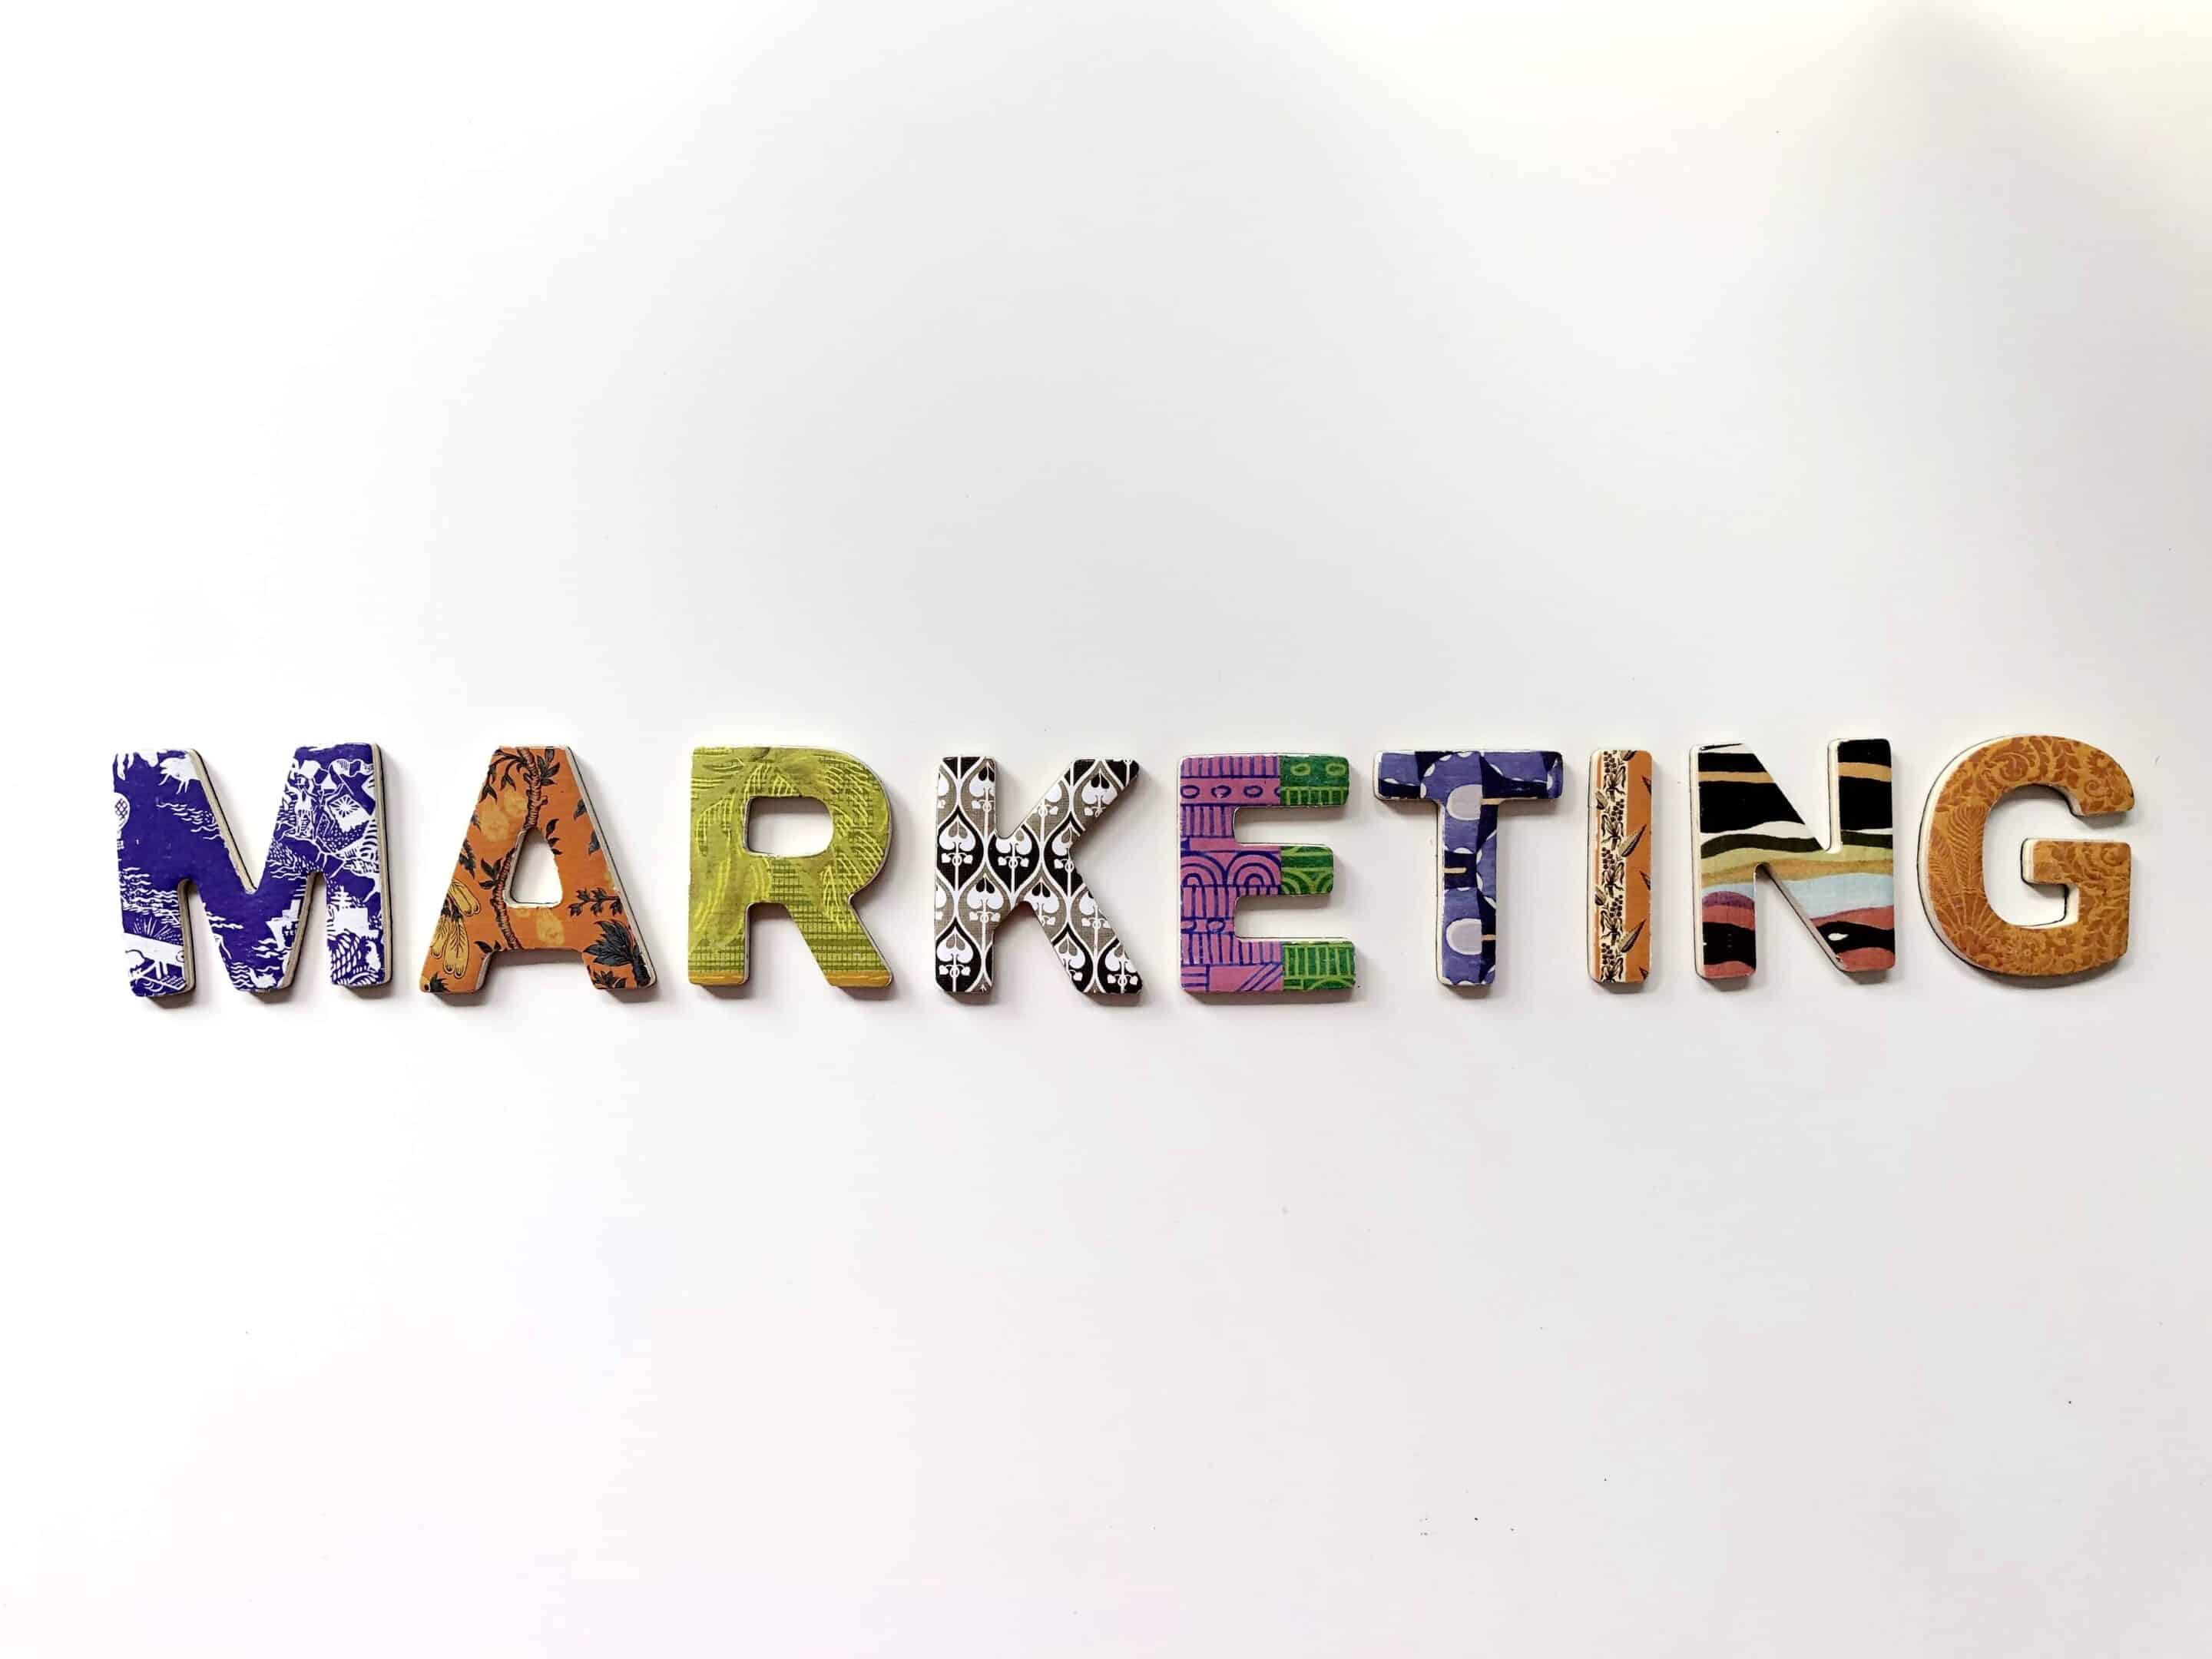 Church Marketing – Pros and Cons